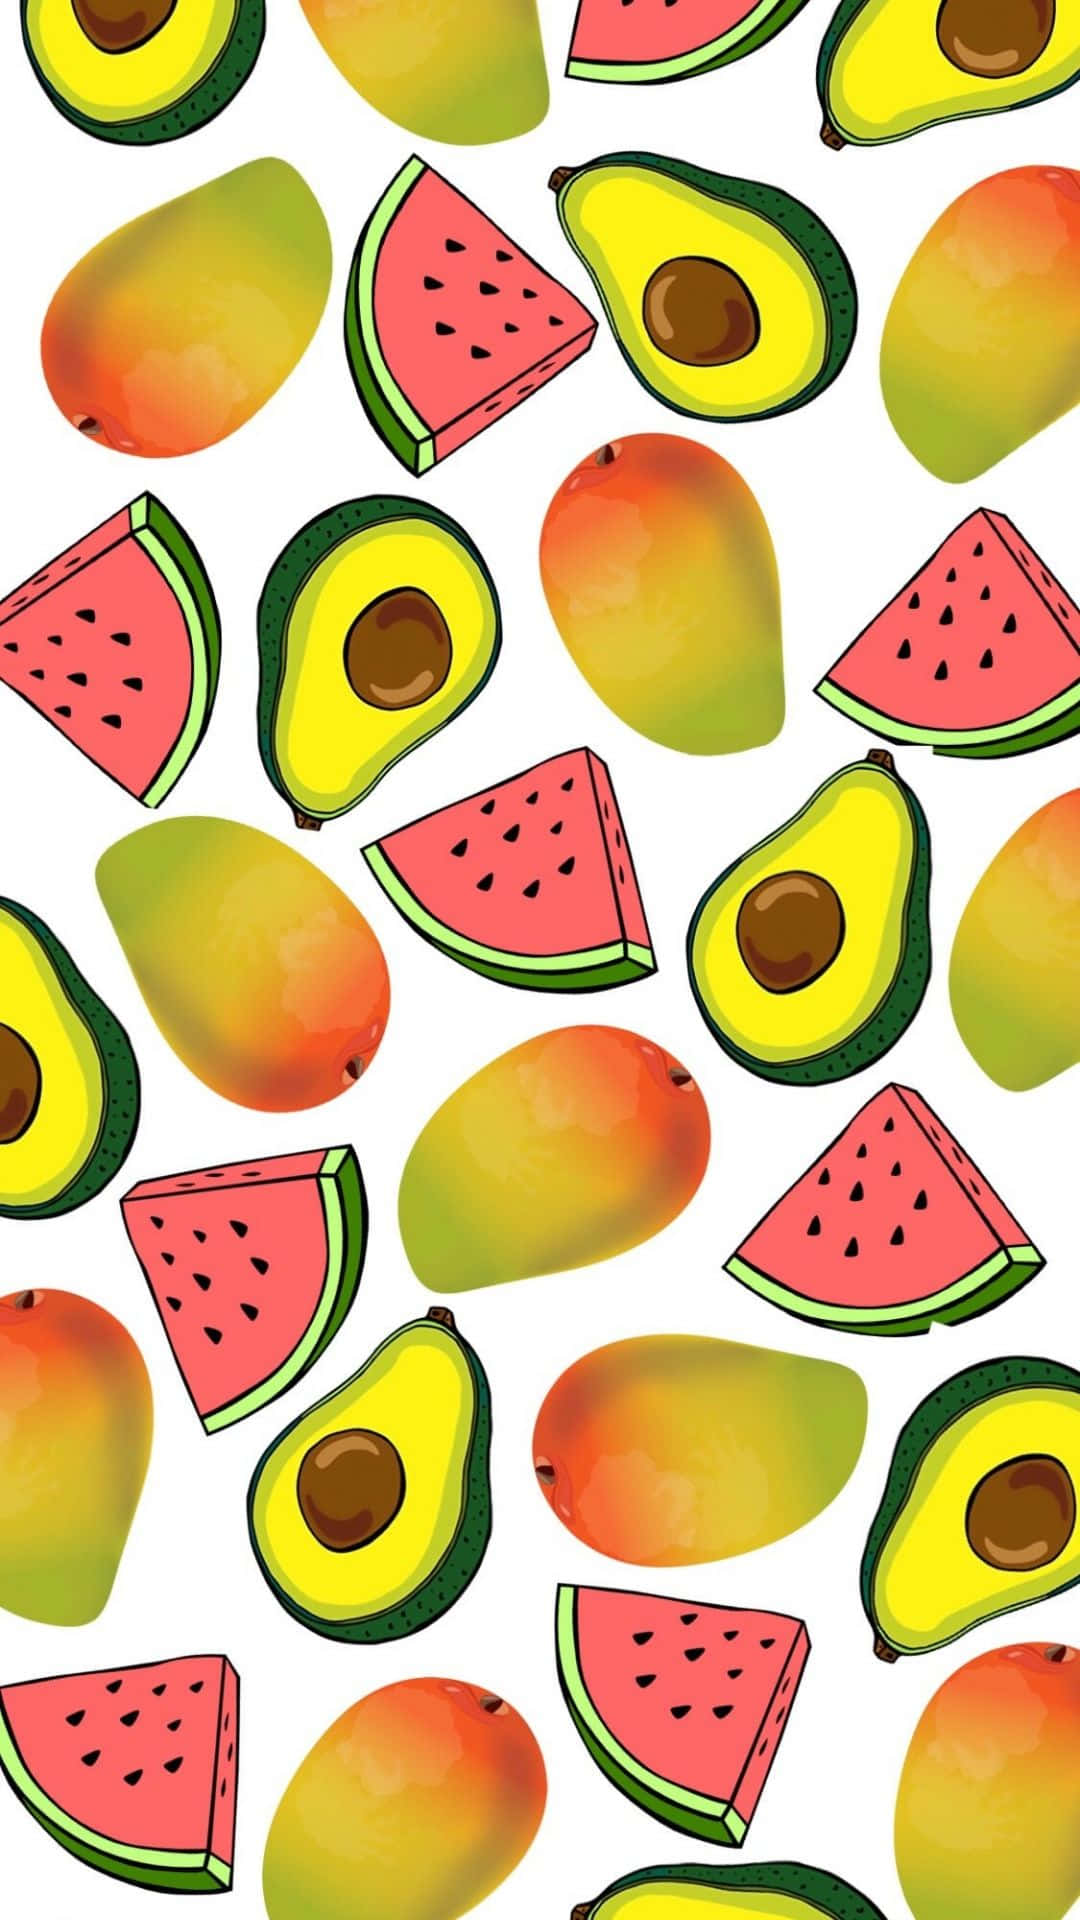 Top 999+ Fruit Wallpapers Full HD, 4K✅Free to Use